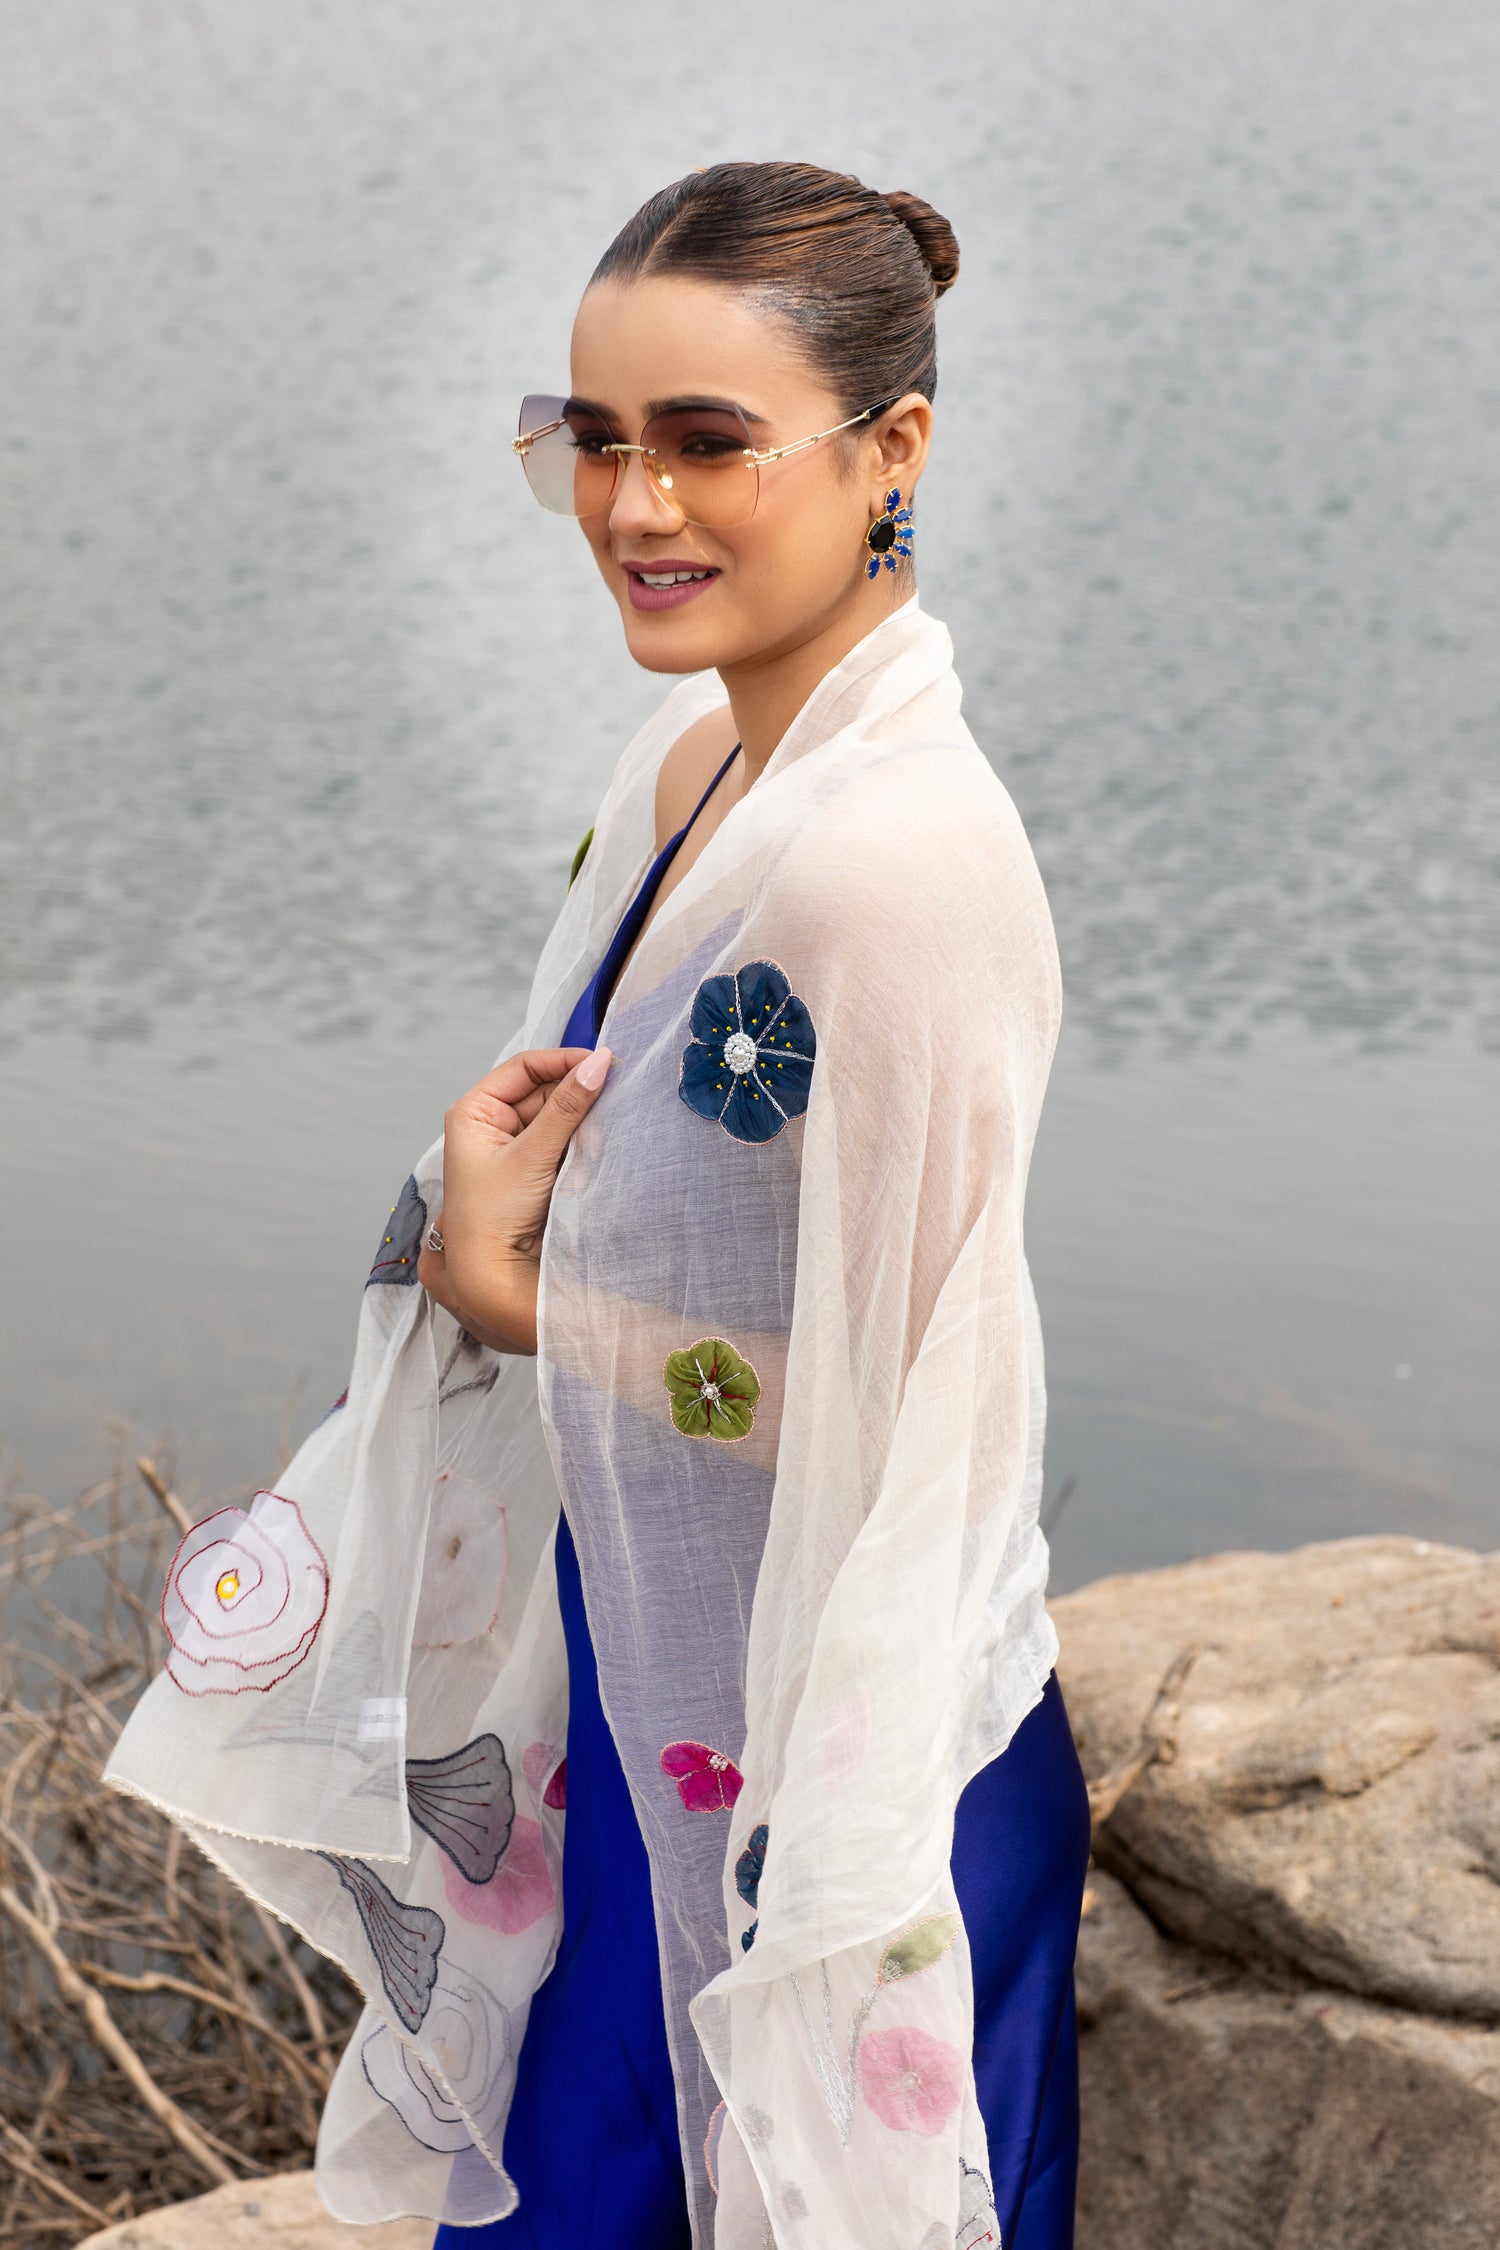 Wrap yourself in elegance with our White Silk Floral Embroidered Cotton Scarf, a versatile and lightweight accessory. Perfect for women seeking both style and comfort in a beautiful head scarf.